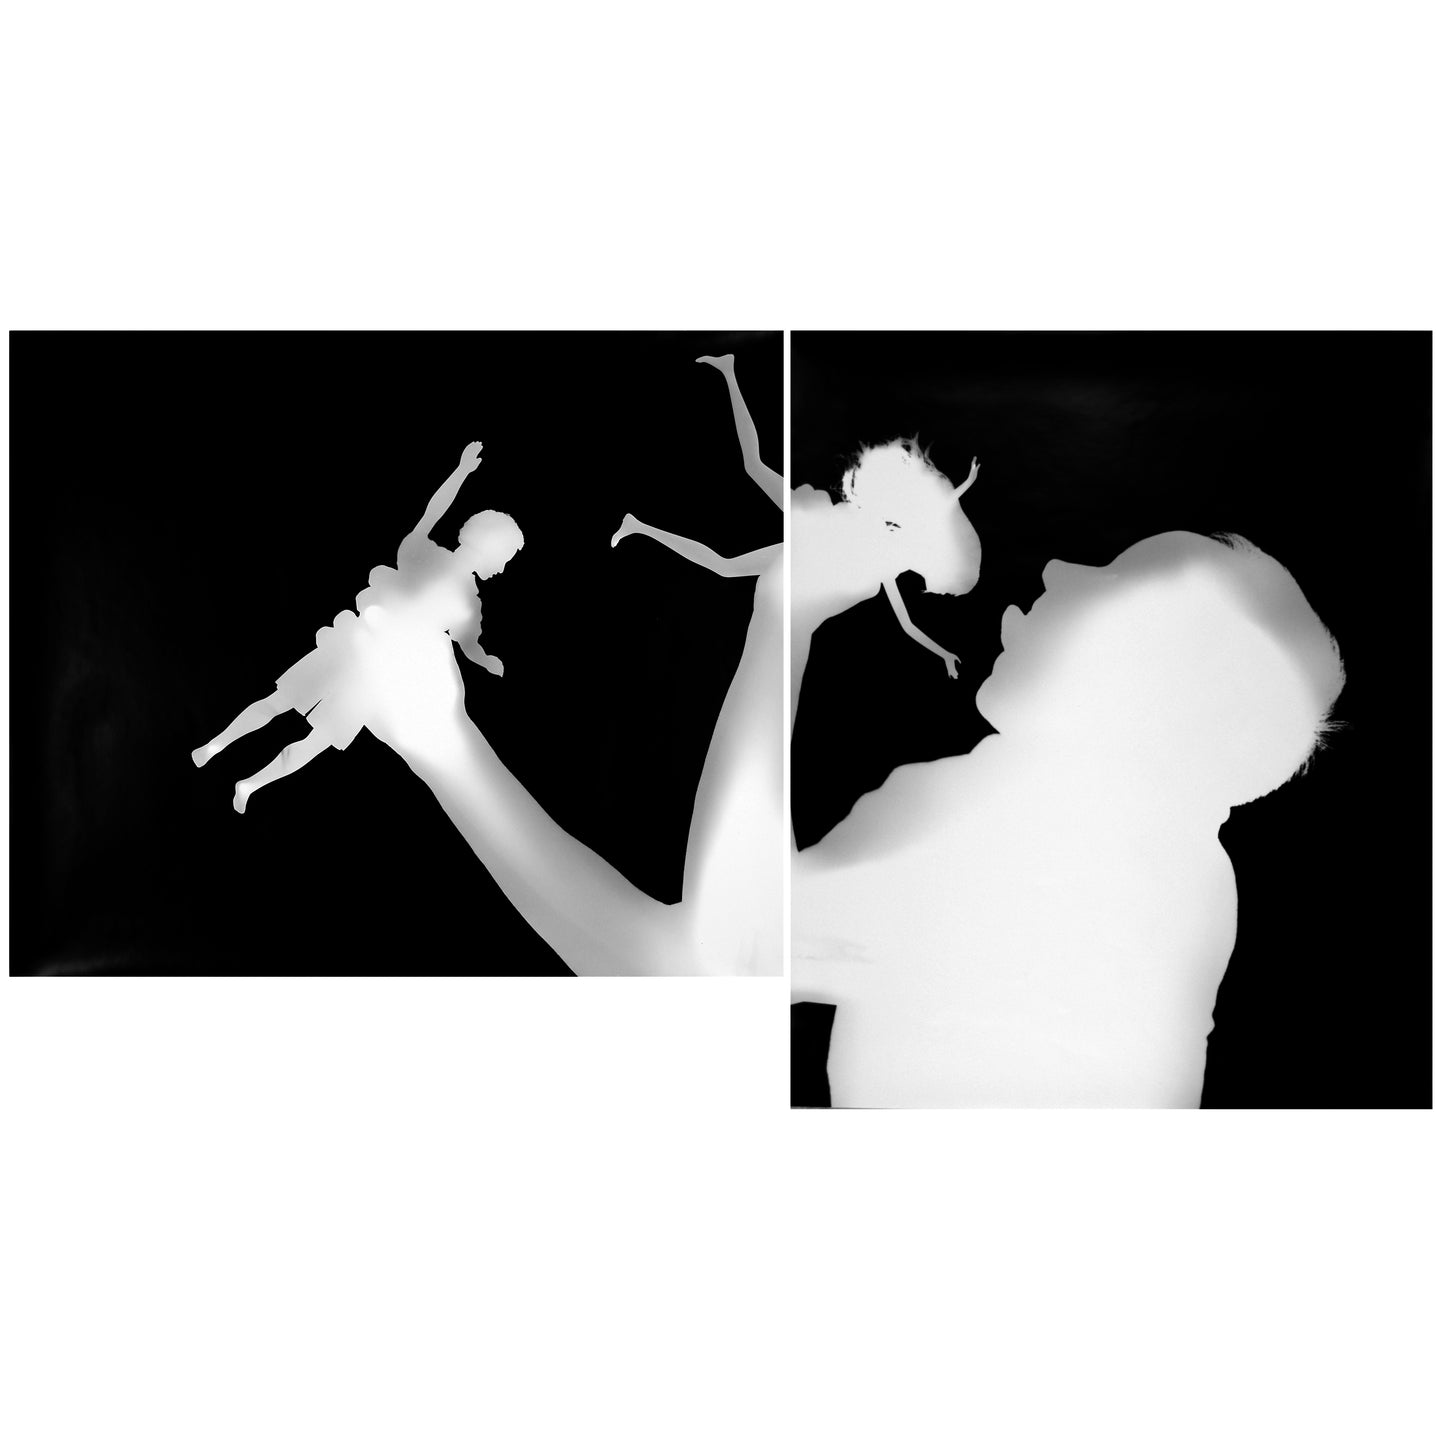 "2nd Fall pt1: Giants Devouring," silver gelatin photogram by Shawn Saumell